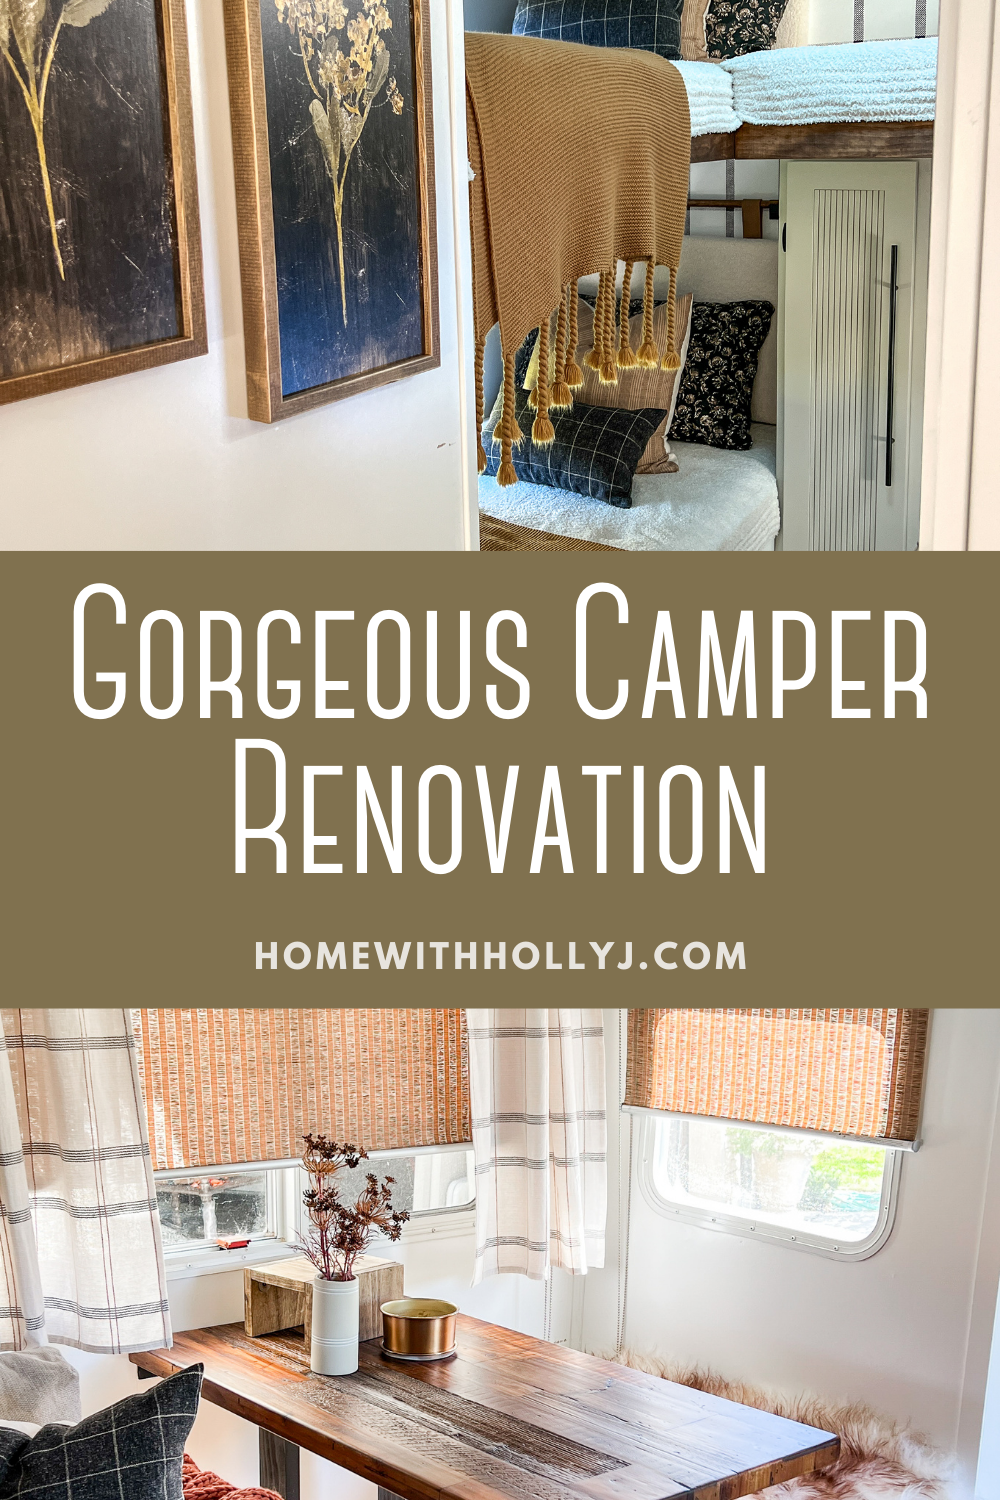 What to do for your anniversary when your spouse has everything? Check out this camper renovation for the ultimate 30th anniversary gift.